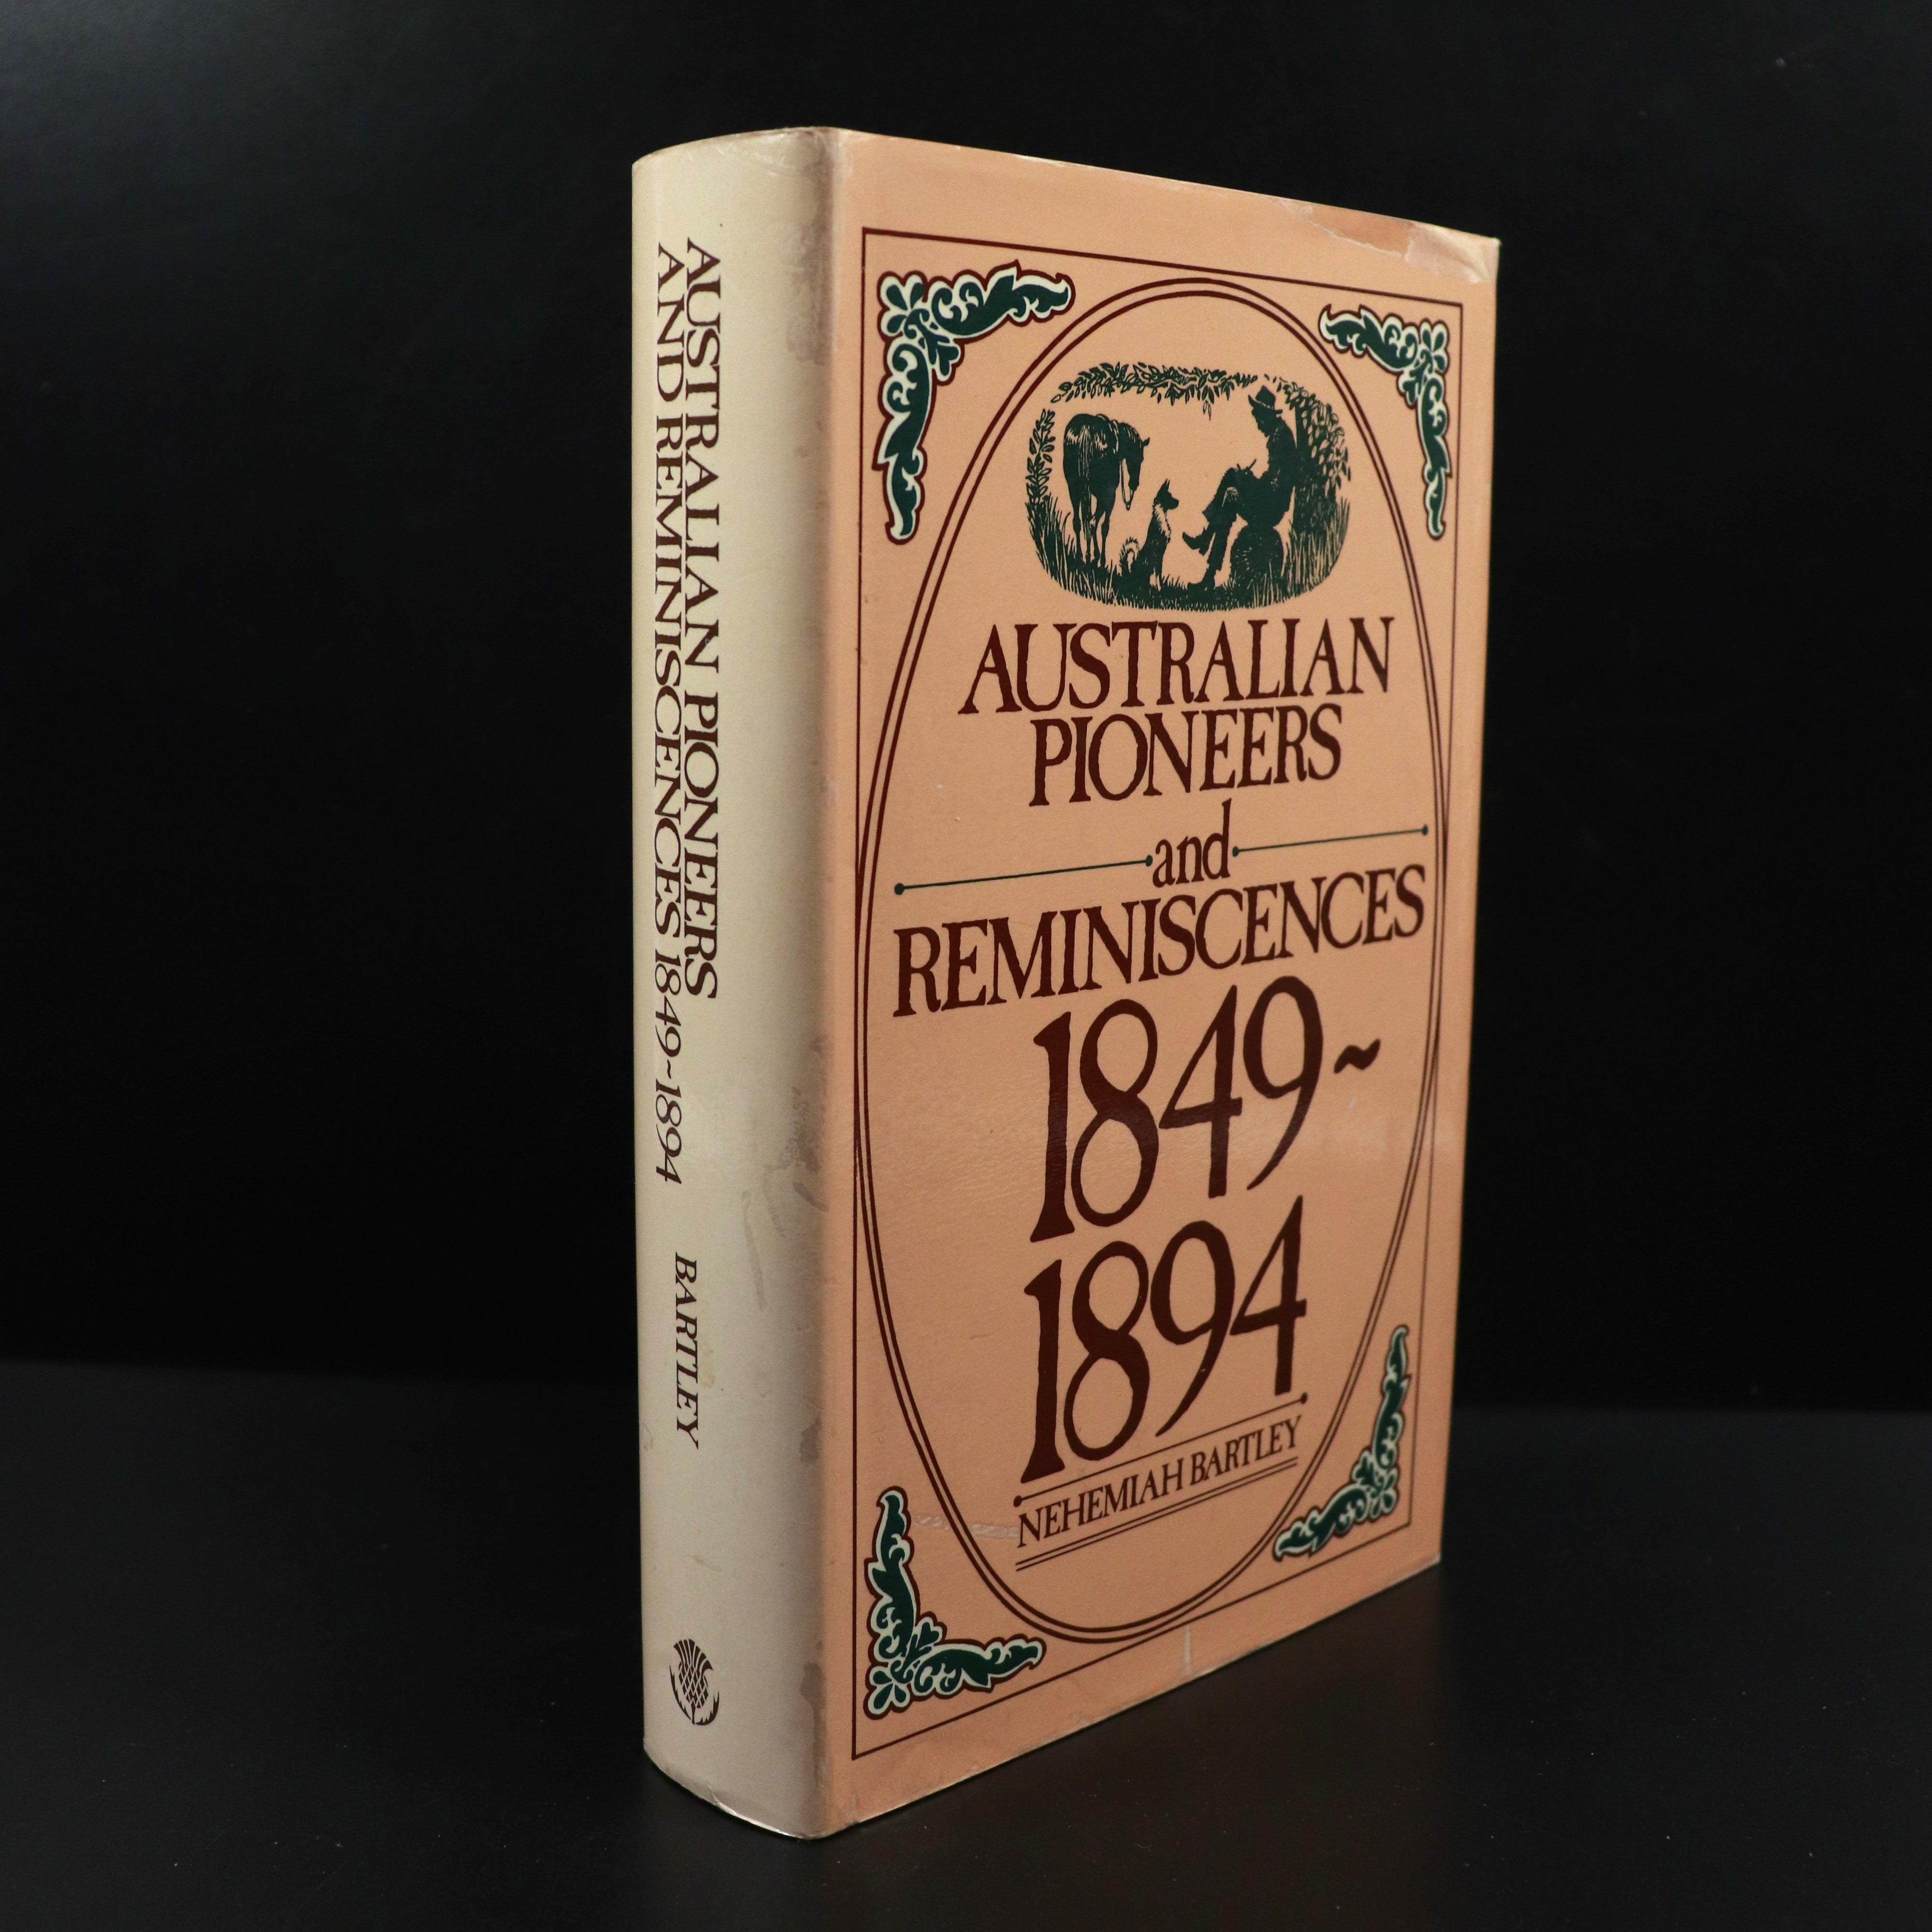 1978 Australian Pioneers & Reminiscences 1849 - 1894 by N. Bartley History Book